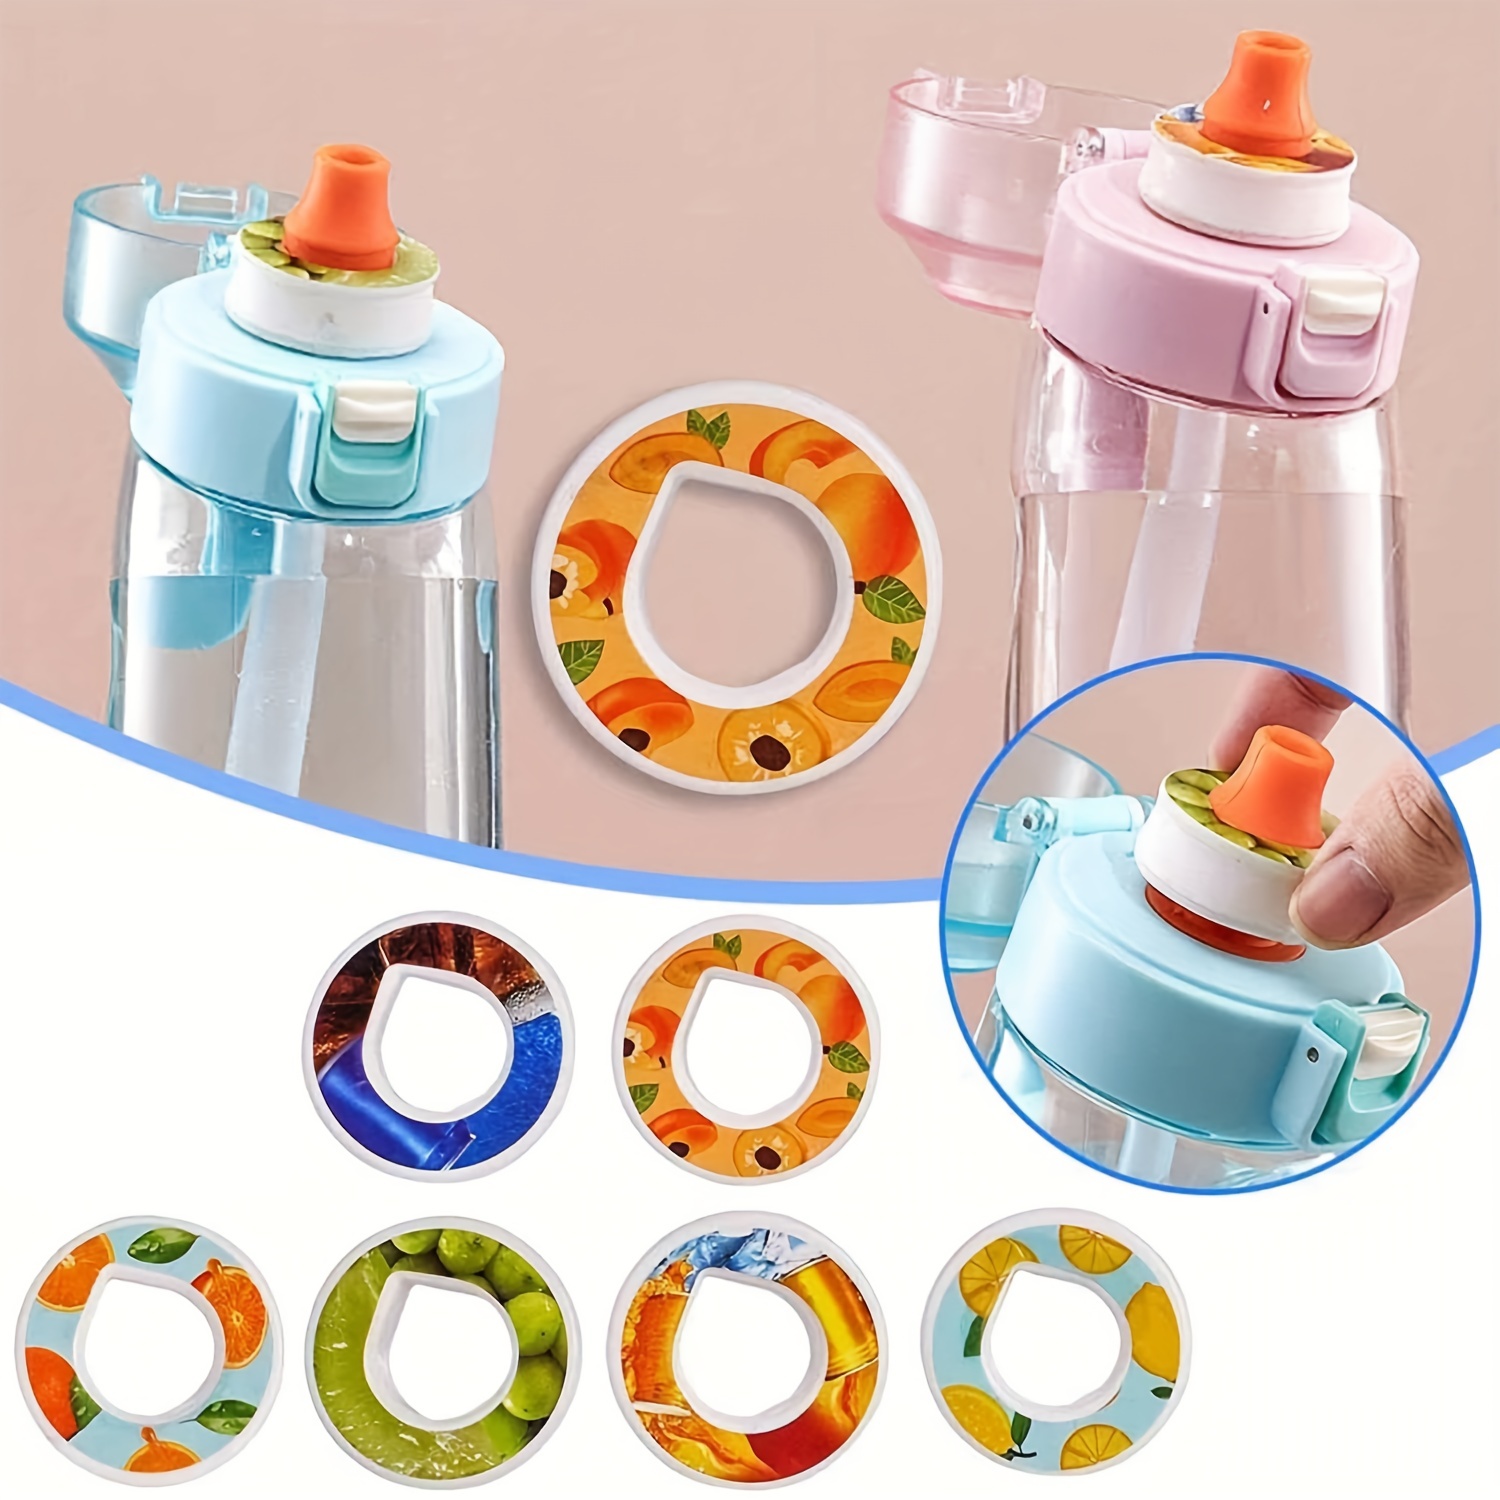 1pc Flavor Pods for Water Bottle, Fruit Fragrance Rings for Water Bottle  Flavor Pods Creative Water Cup Scented Pods for Outdoor Sports